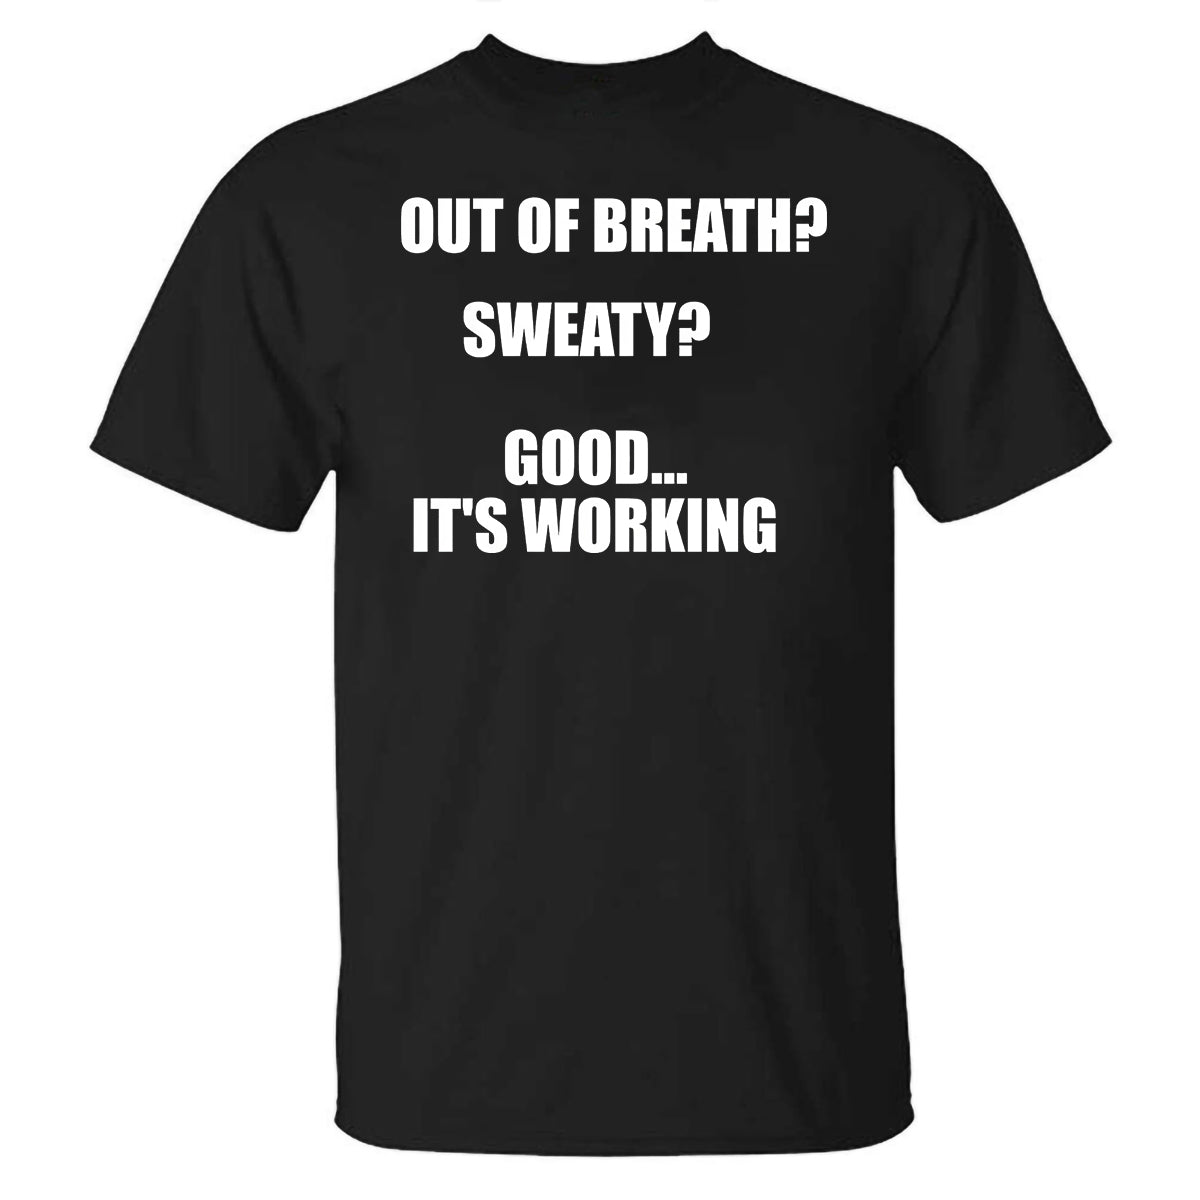 Out Of Breath?sweaty?good It's Working Printed T-shirt